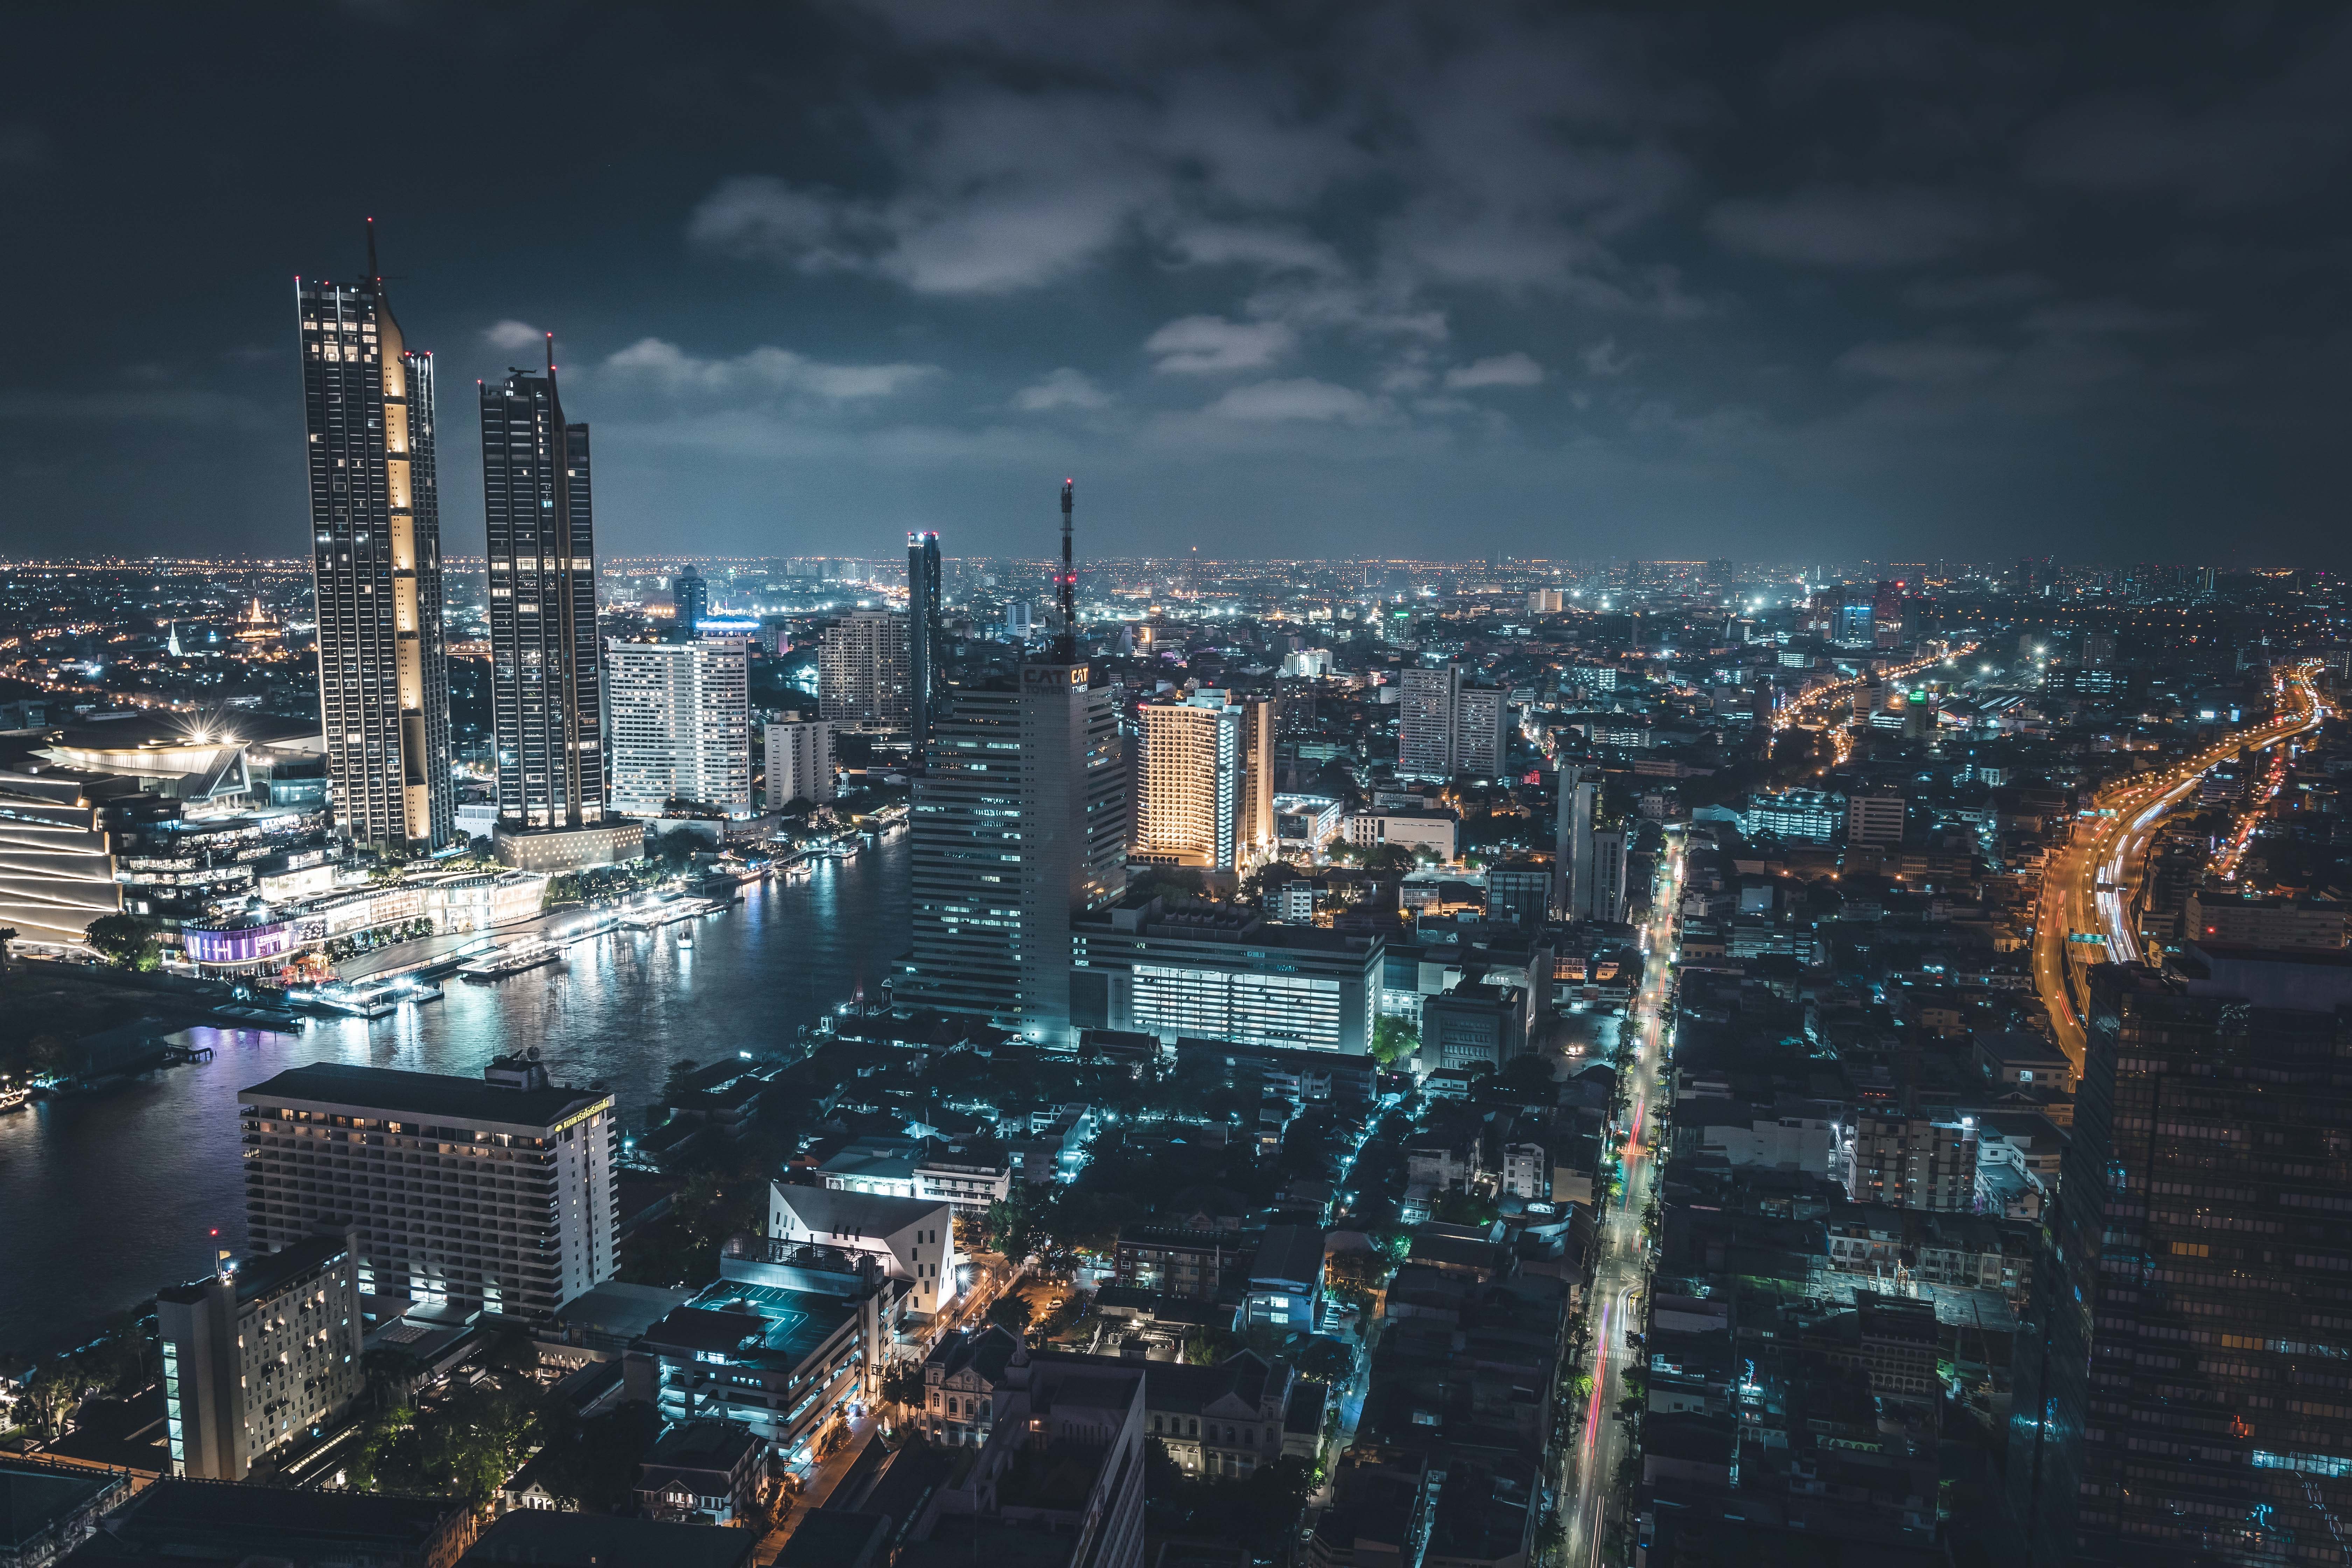 bangkok, cities, architecture, building, lights, view from above, night city